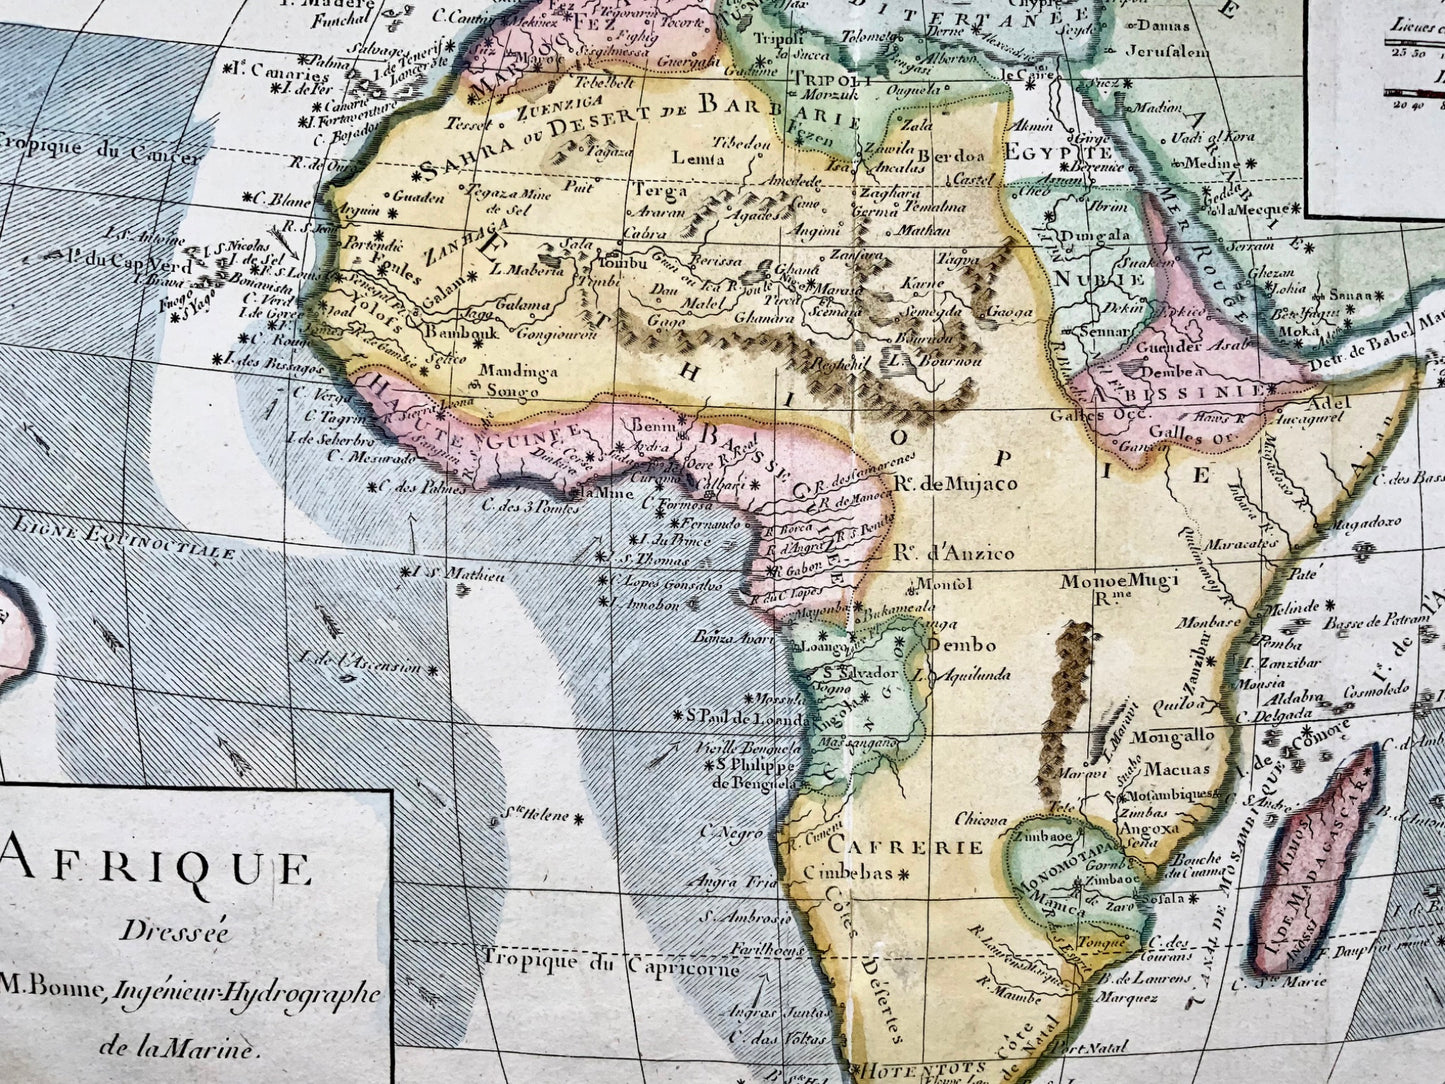 1780 Africa, Bonne, hand coloured, copper engraved map